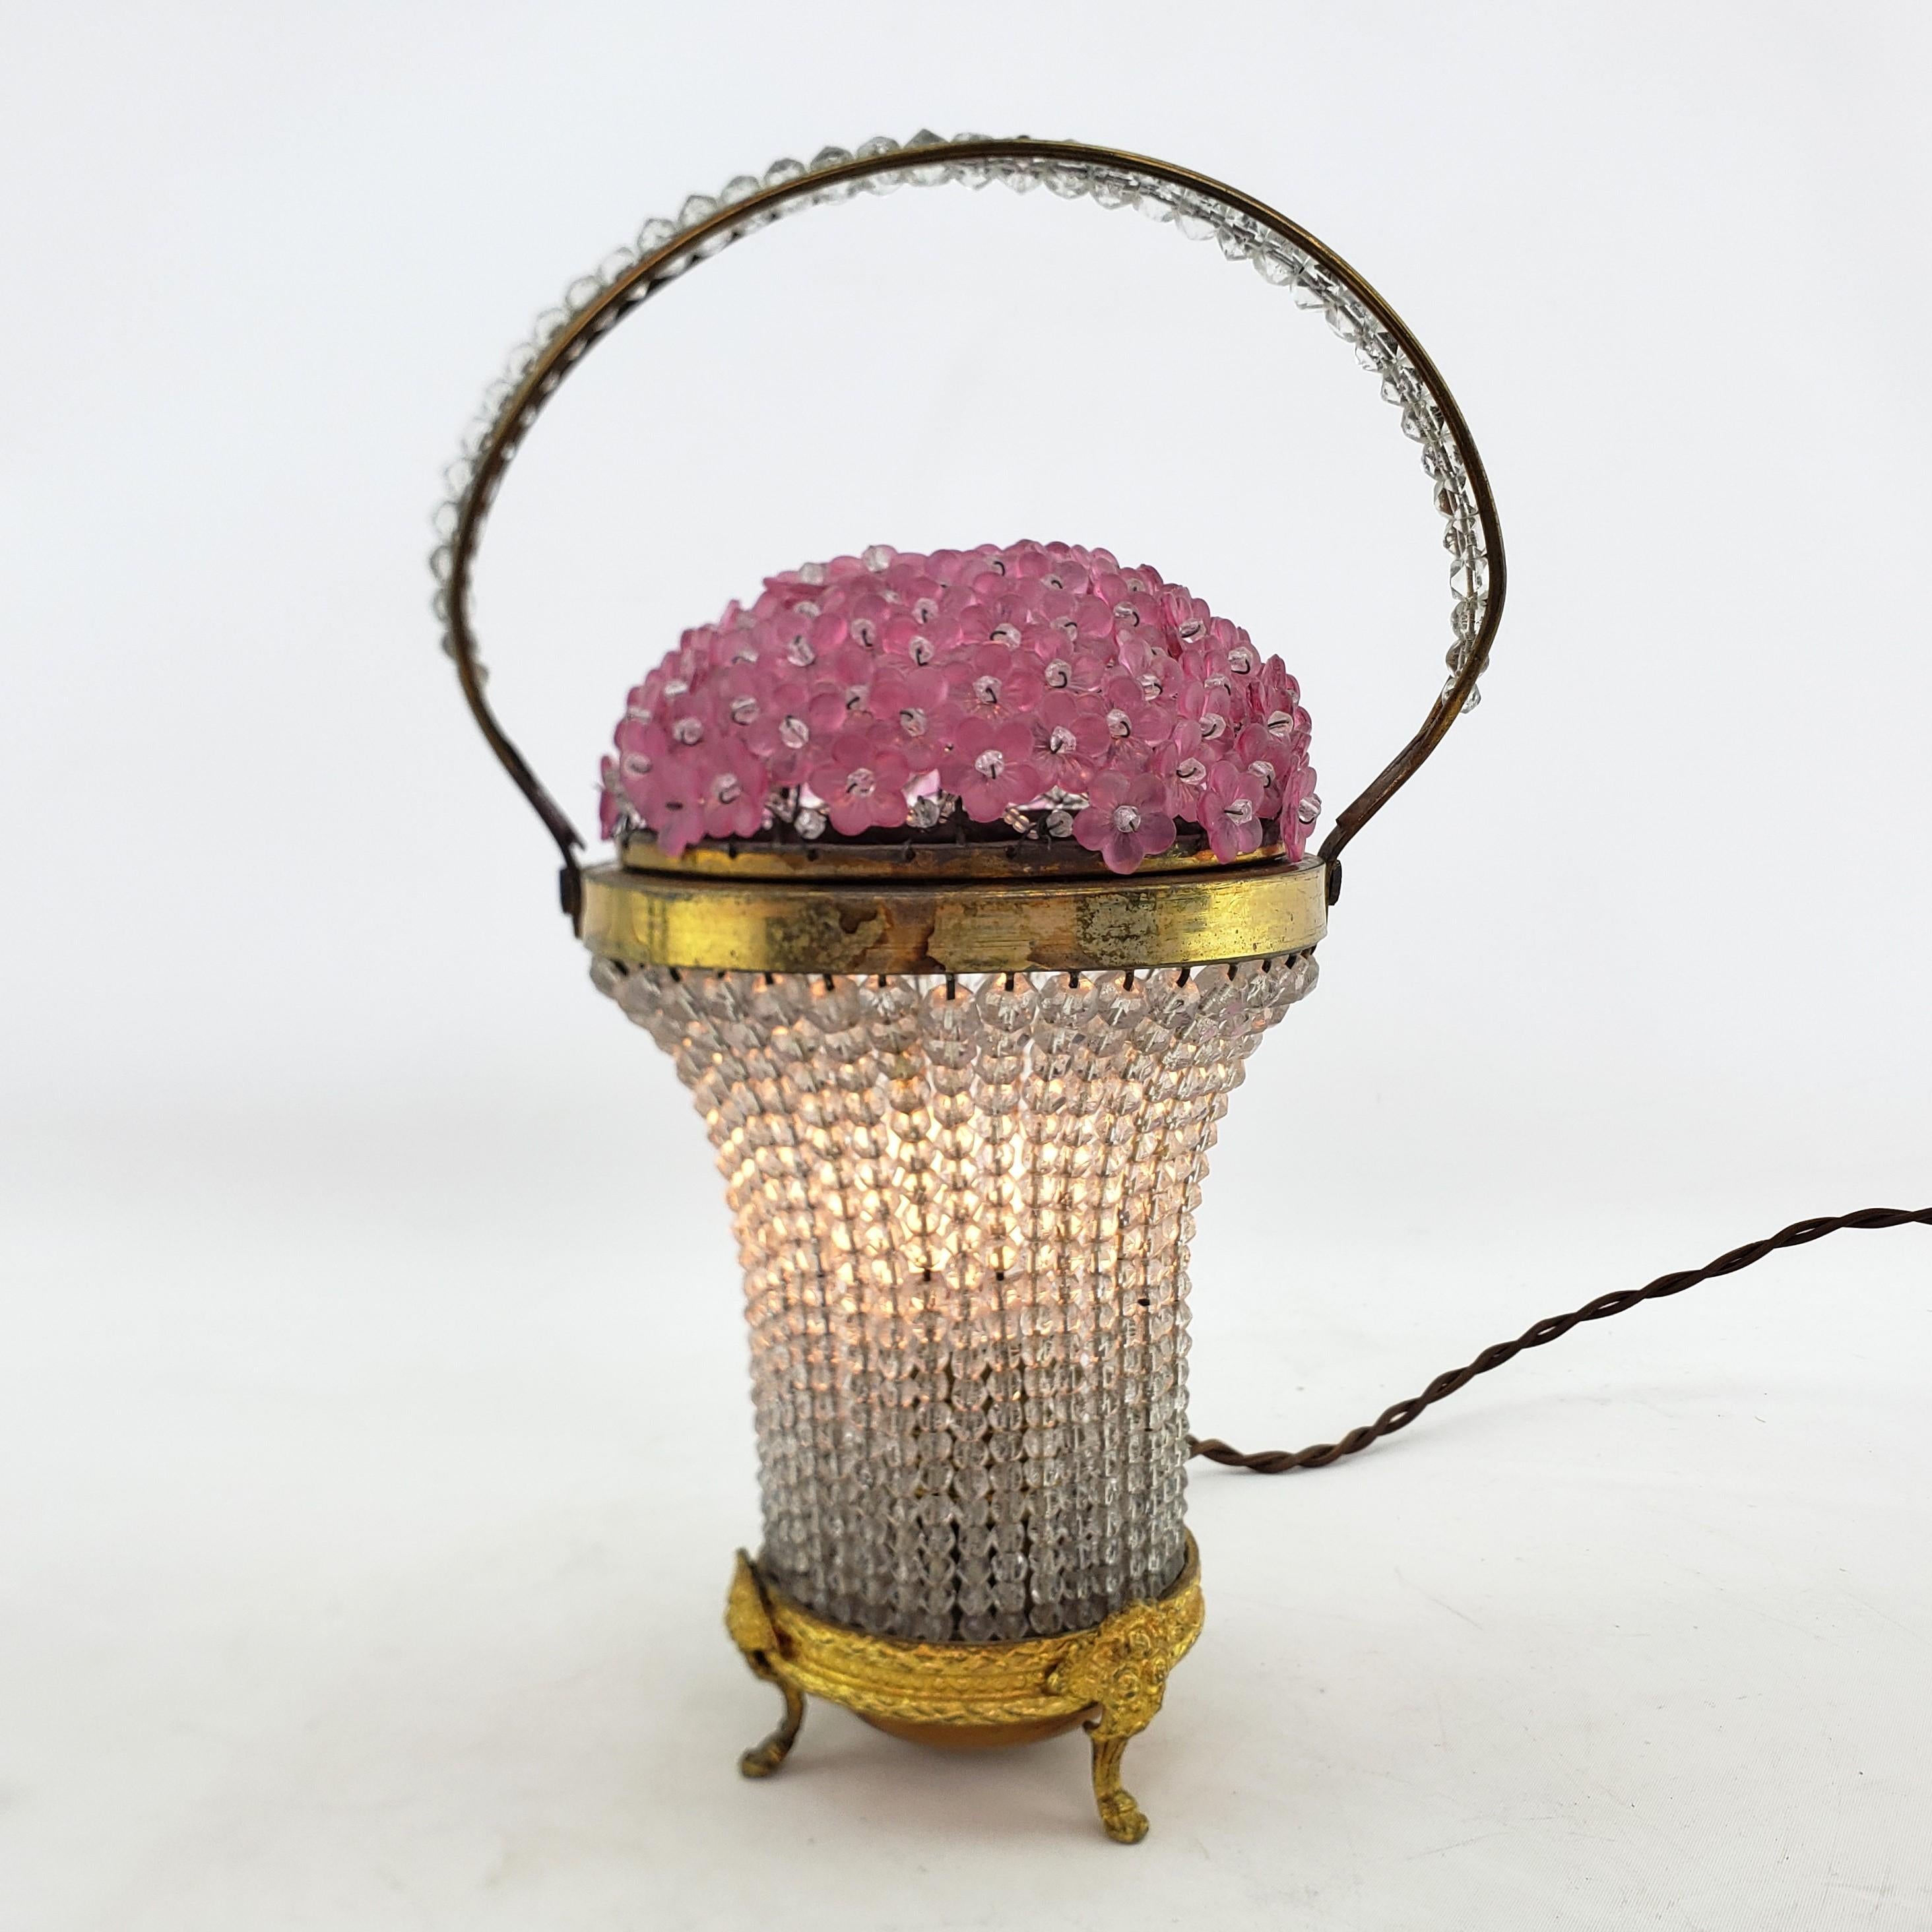 This vintage accent table light is unsigned with respect to the maker, but presumed to have originated from the Czech Republic and date to approximately 1920 and done in the period Art Deco style. The light is composed of a thick wire frame with a